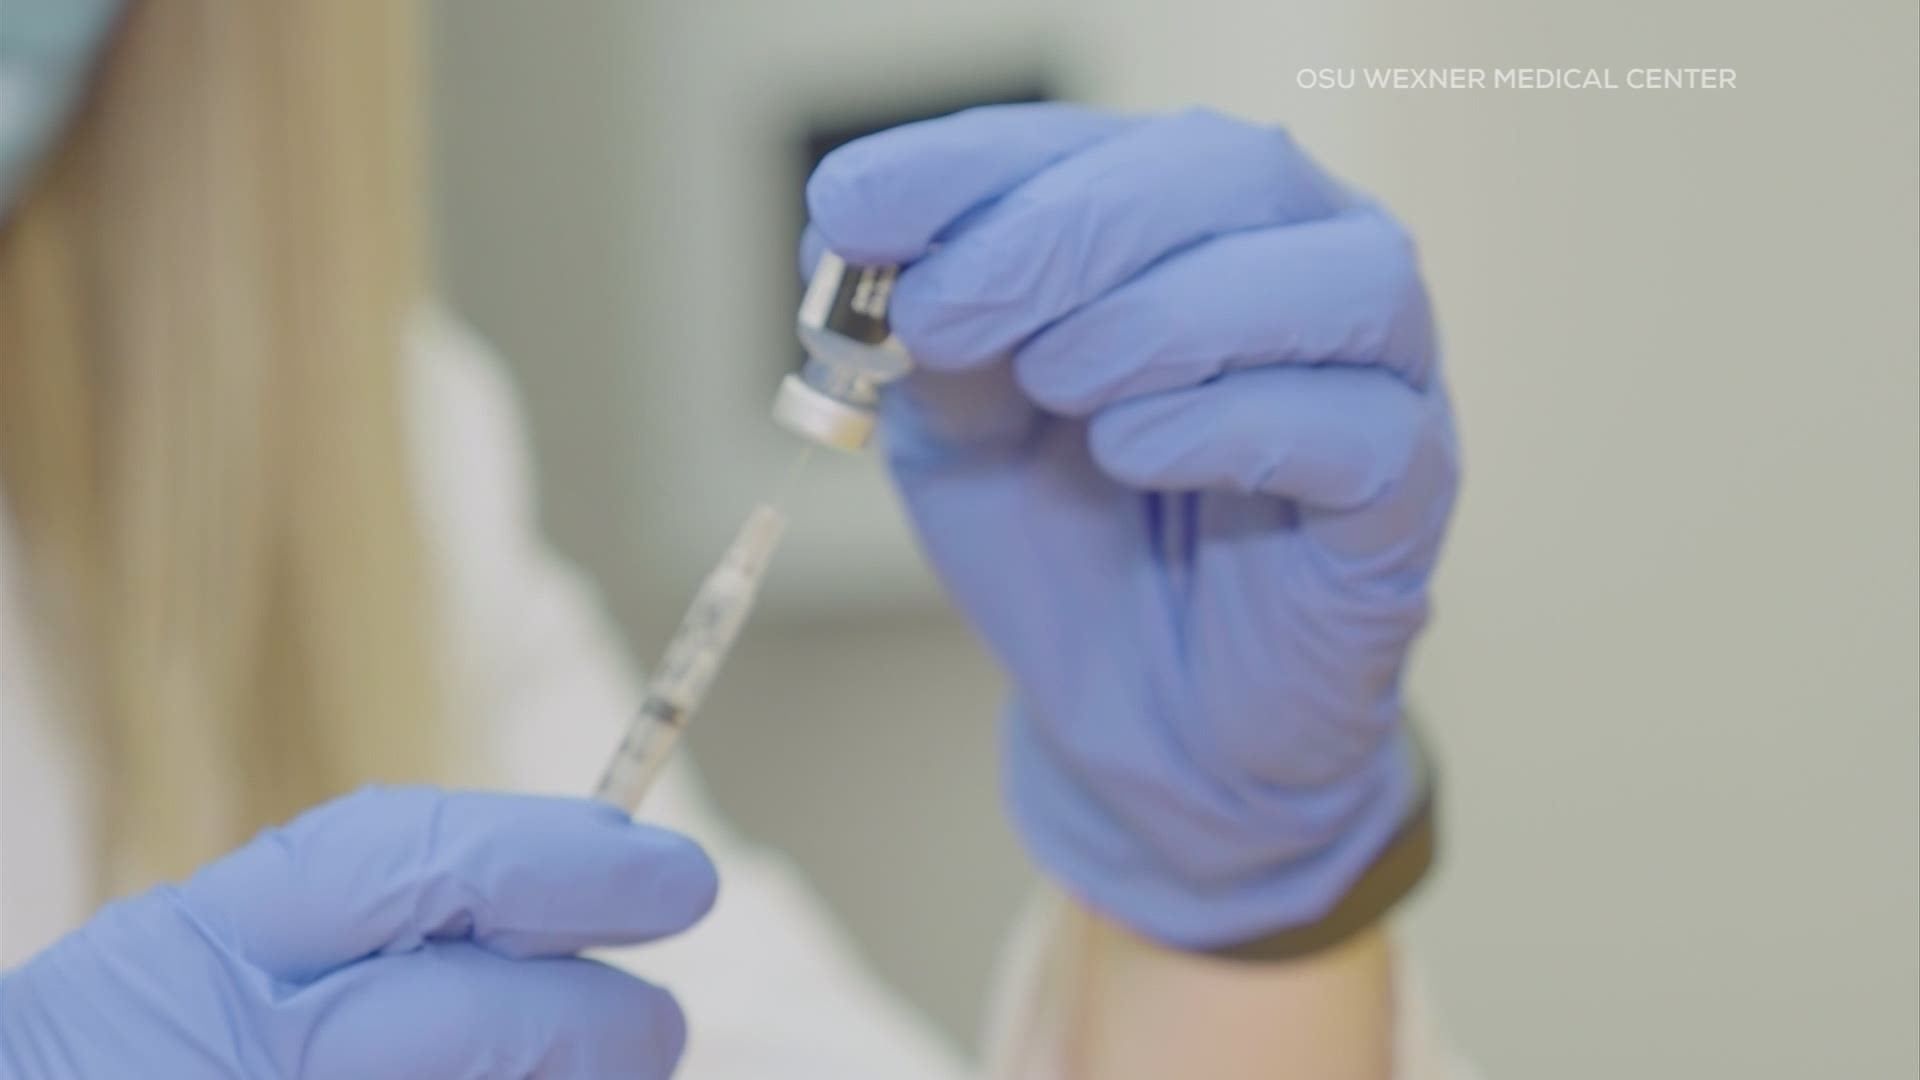 Pfizer hopes to send out 25 million doses of its COVID-19 vaccine by the end of the year.